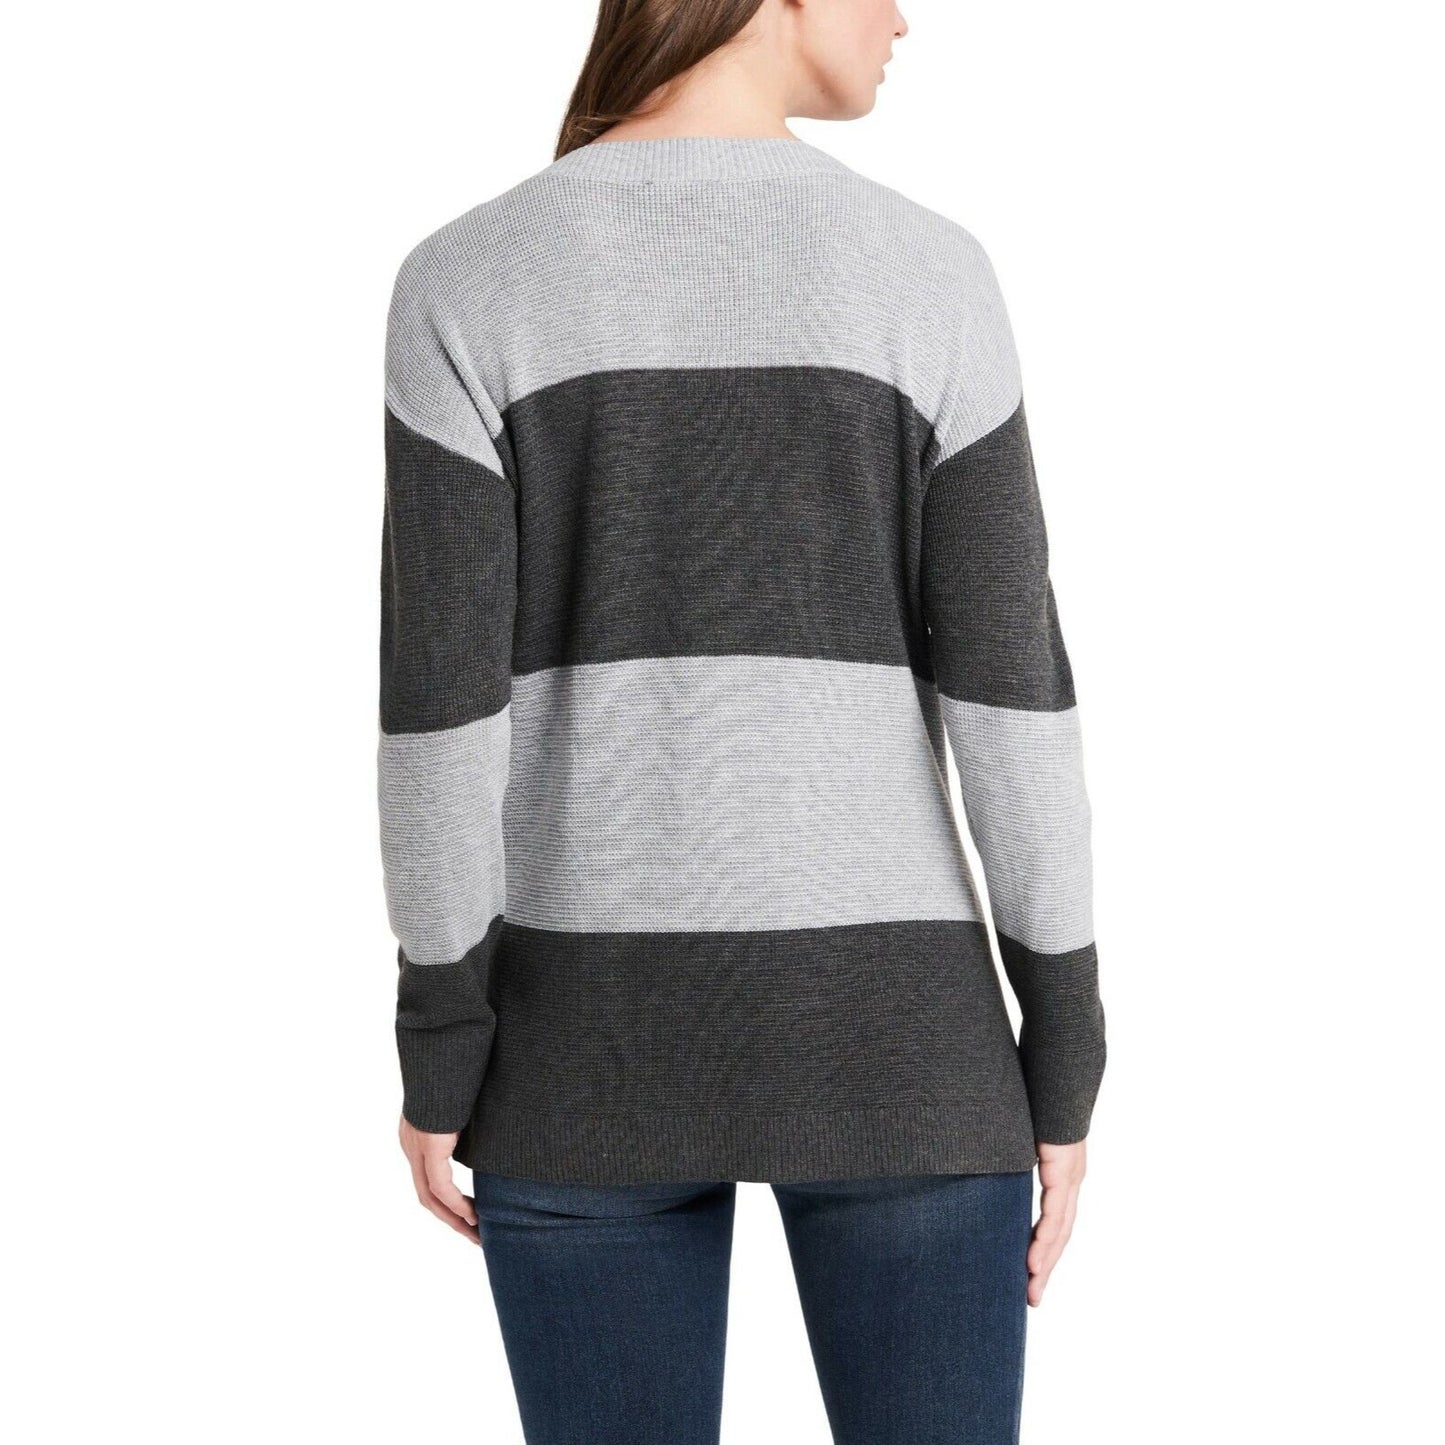 Vince Camuto Women's Button Shoulder Stripe Sweater, Gray, Size XL, $79, NWT